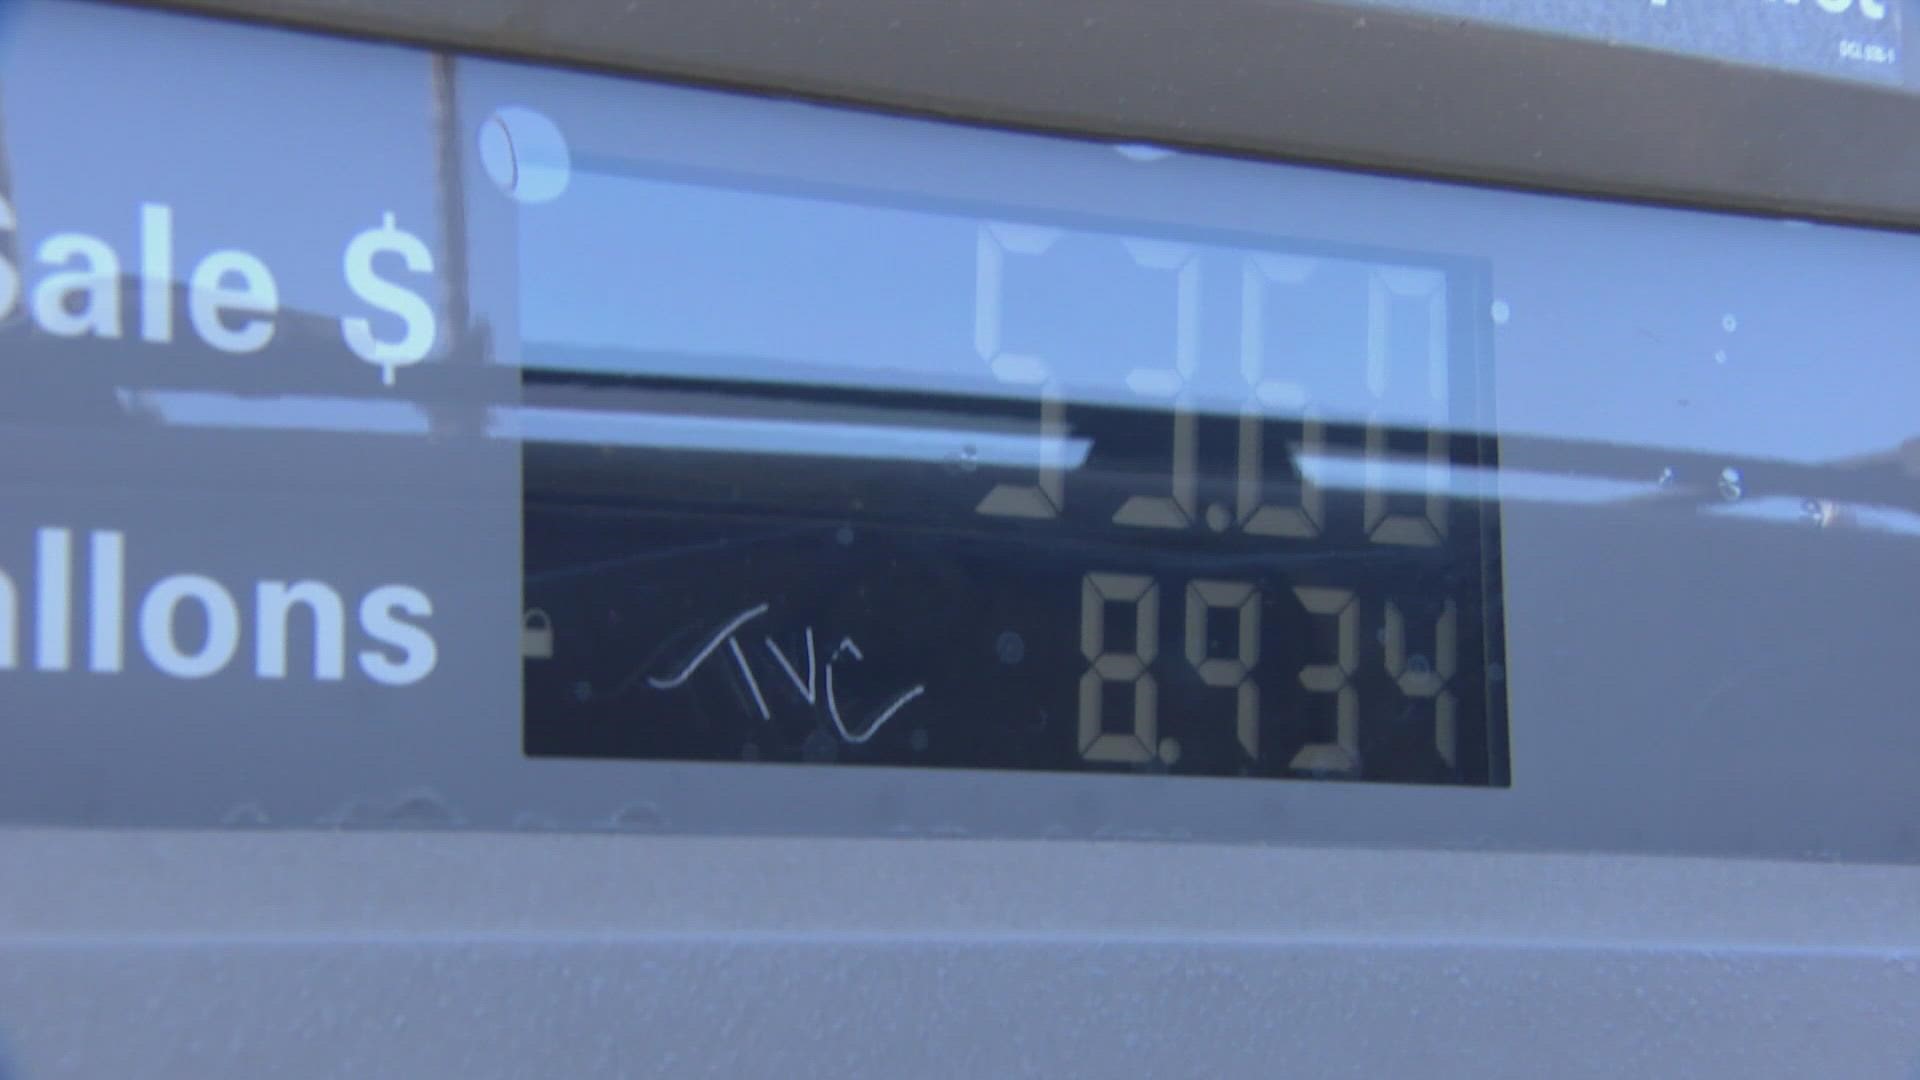 The national average for a gallon of regular gas is $4.27 but in California, it's $5.80.